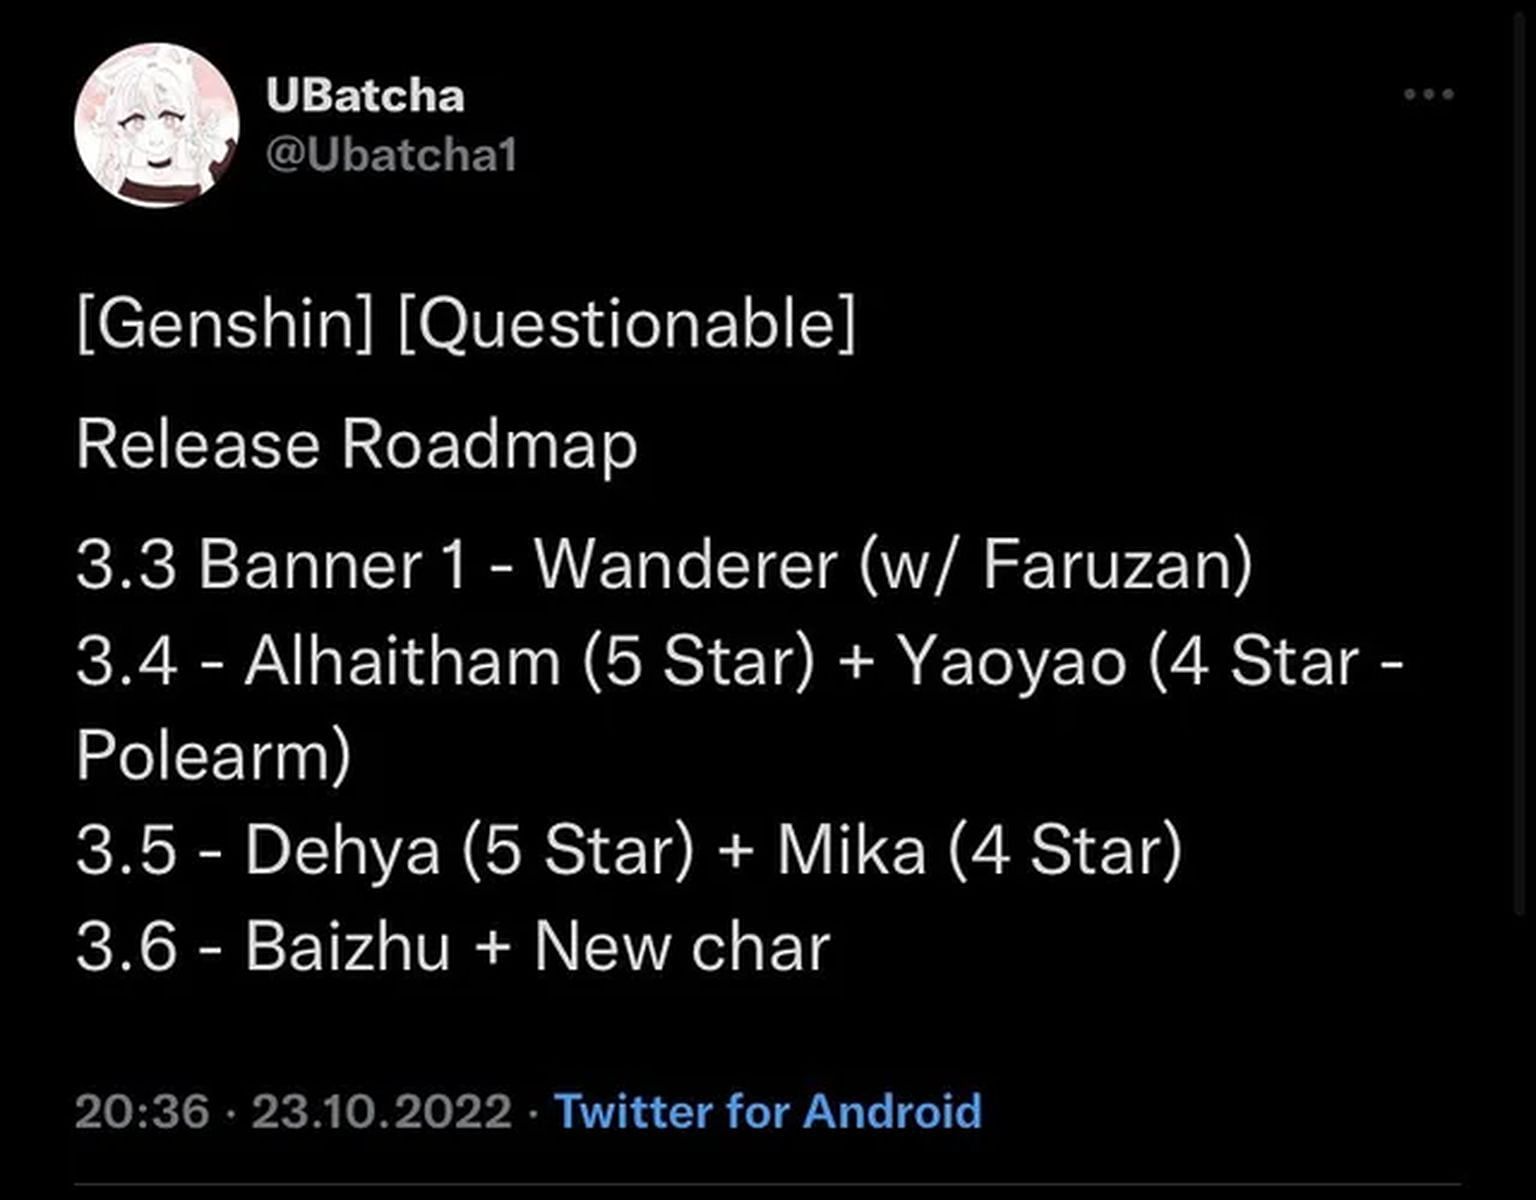 This old deleted Tweet did mention a new character (Image via Ubatcha)